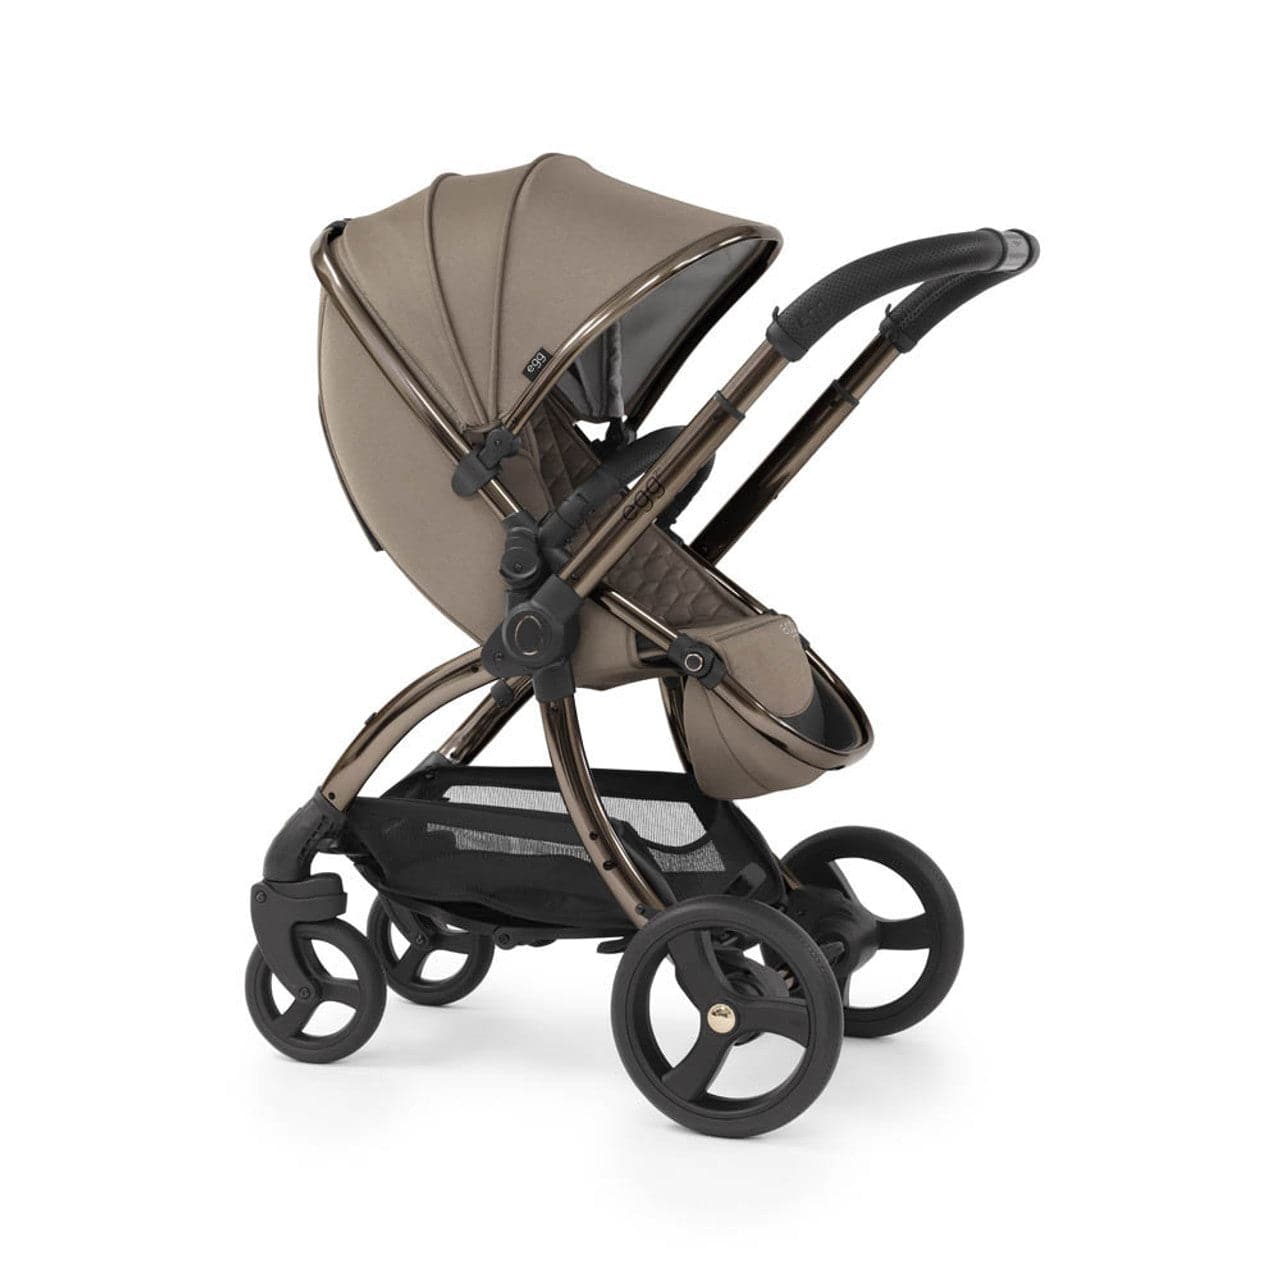 Egg® 2 Luxury Shell i-Size Travel System Bundle - Mink - For Your Little One